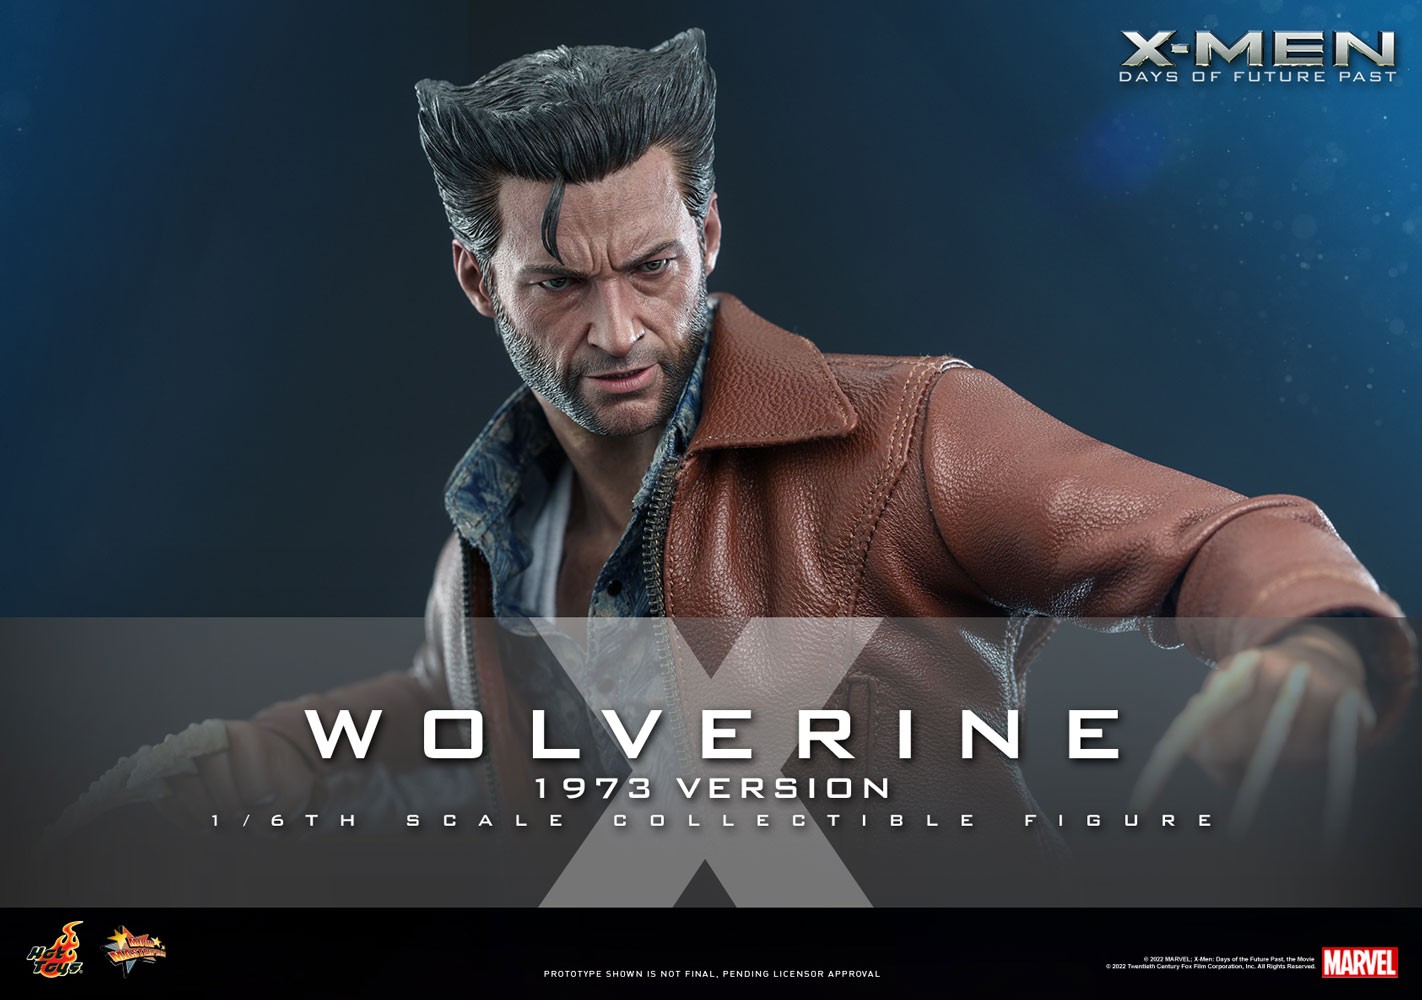 Wolverine (1973 Version) (Special Edition) Exclusive Edition (Prototype Shown) View 1